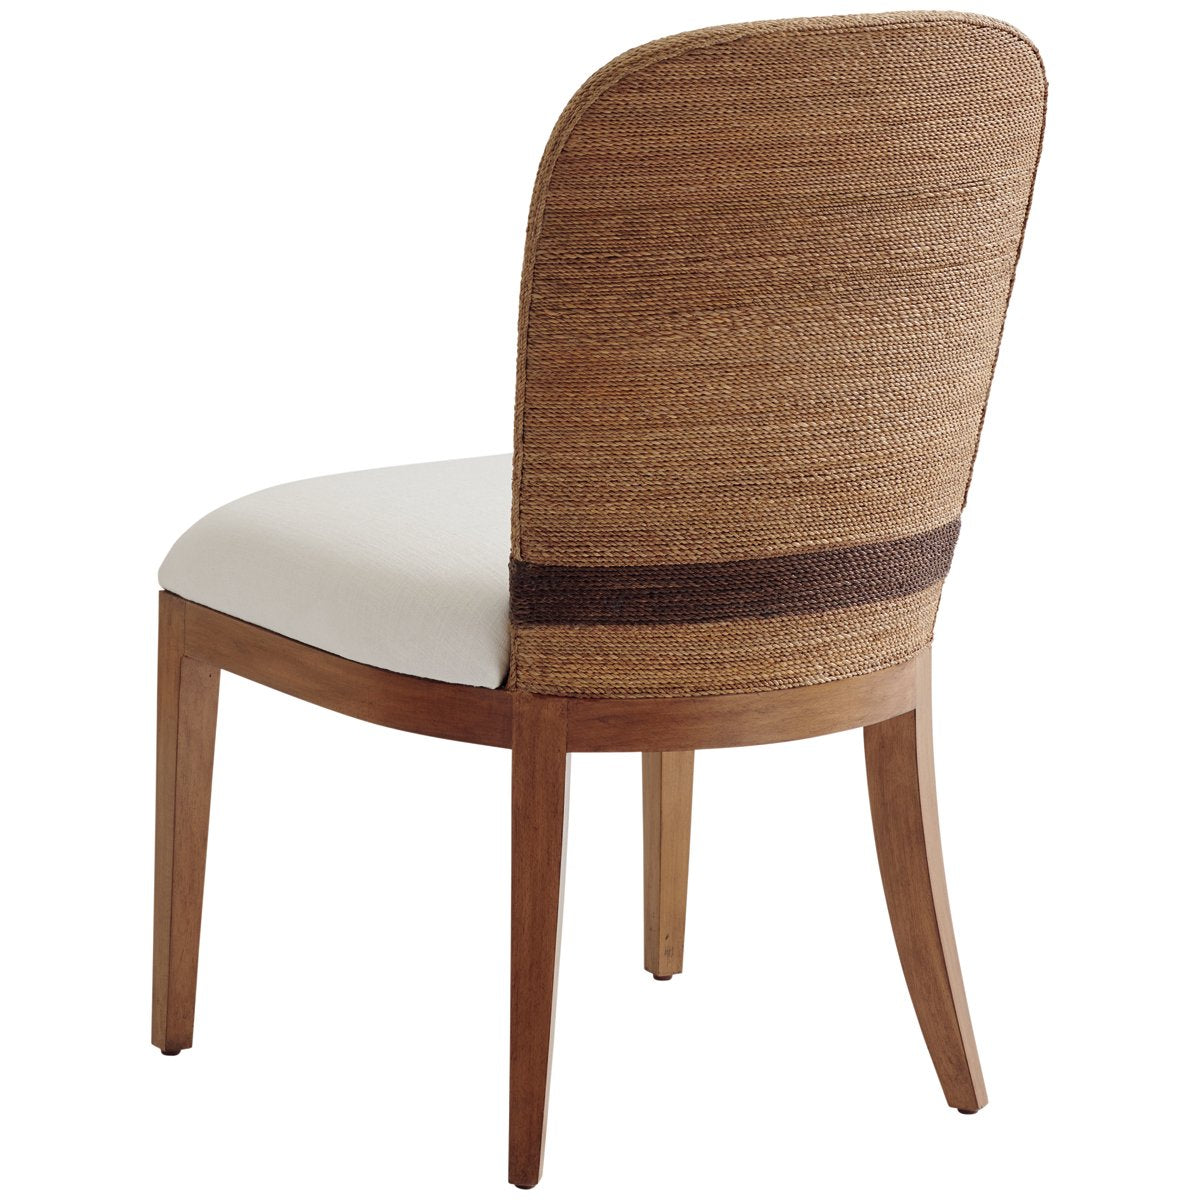 Tommy Bahama Palm Desert Bryson Woven Side Chair